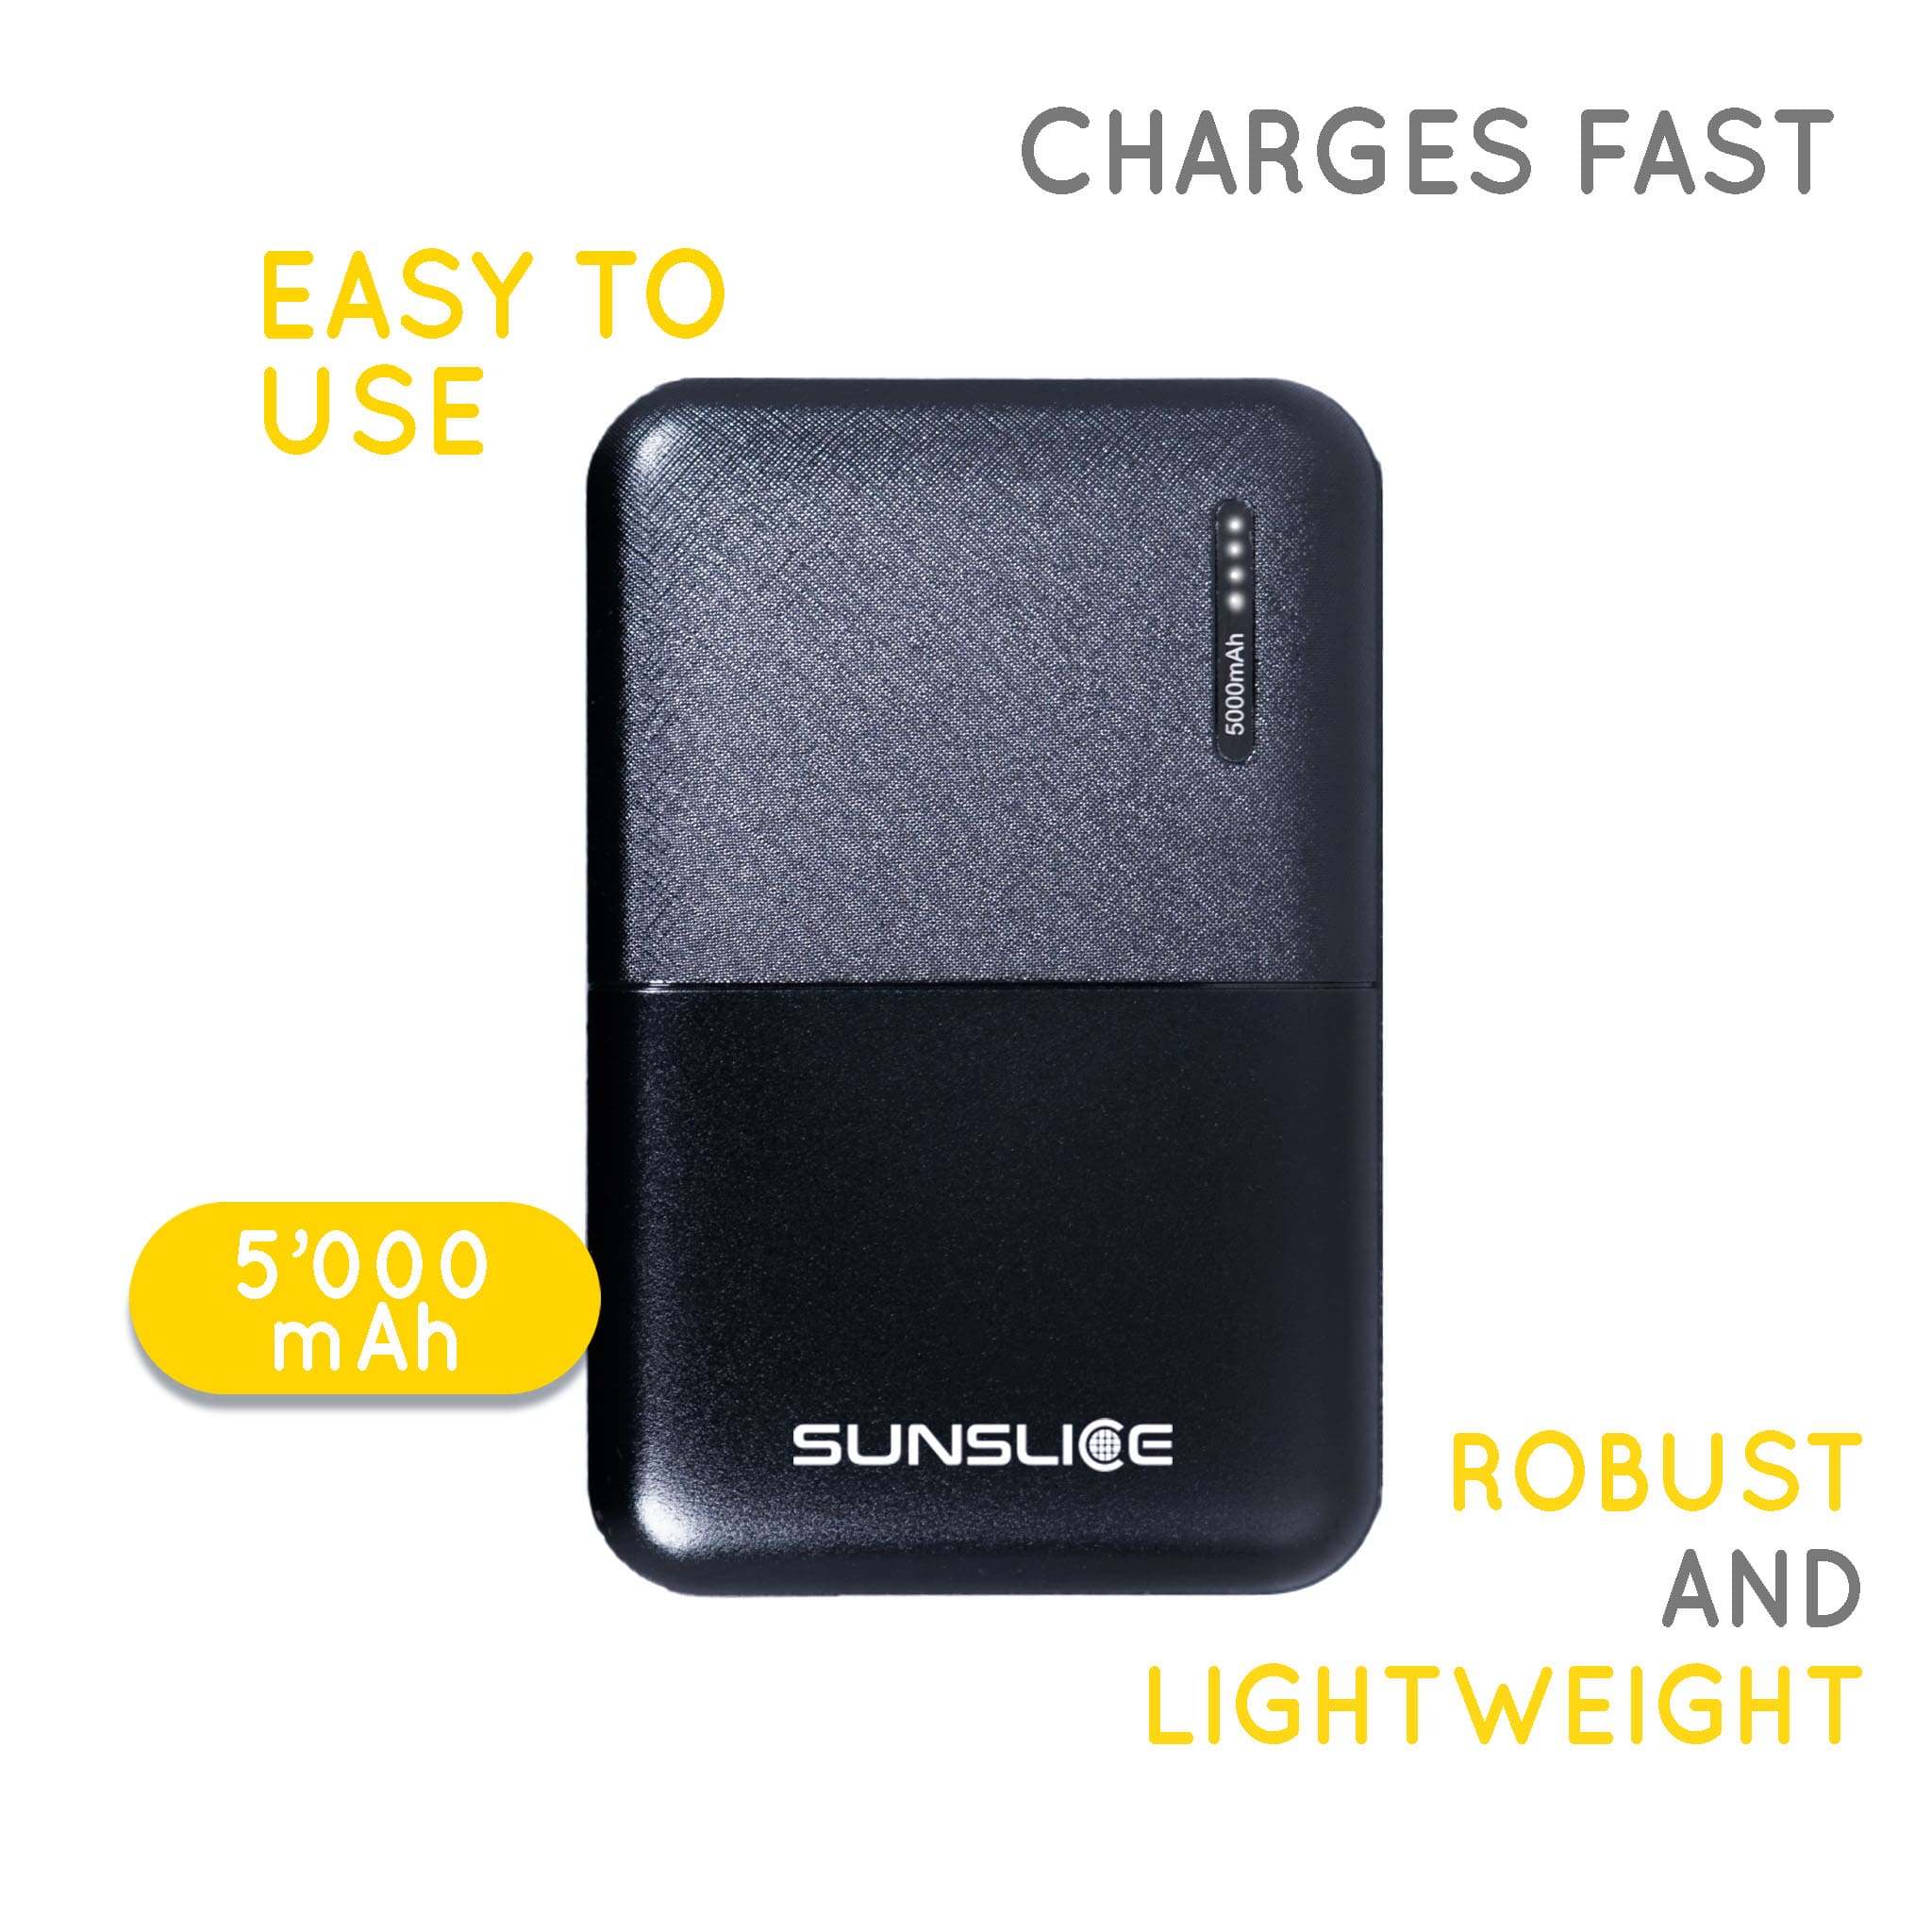 Capacity: 5000 milliampere. Power bank easy to use, robust and lightweight. 